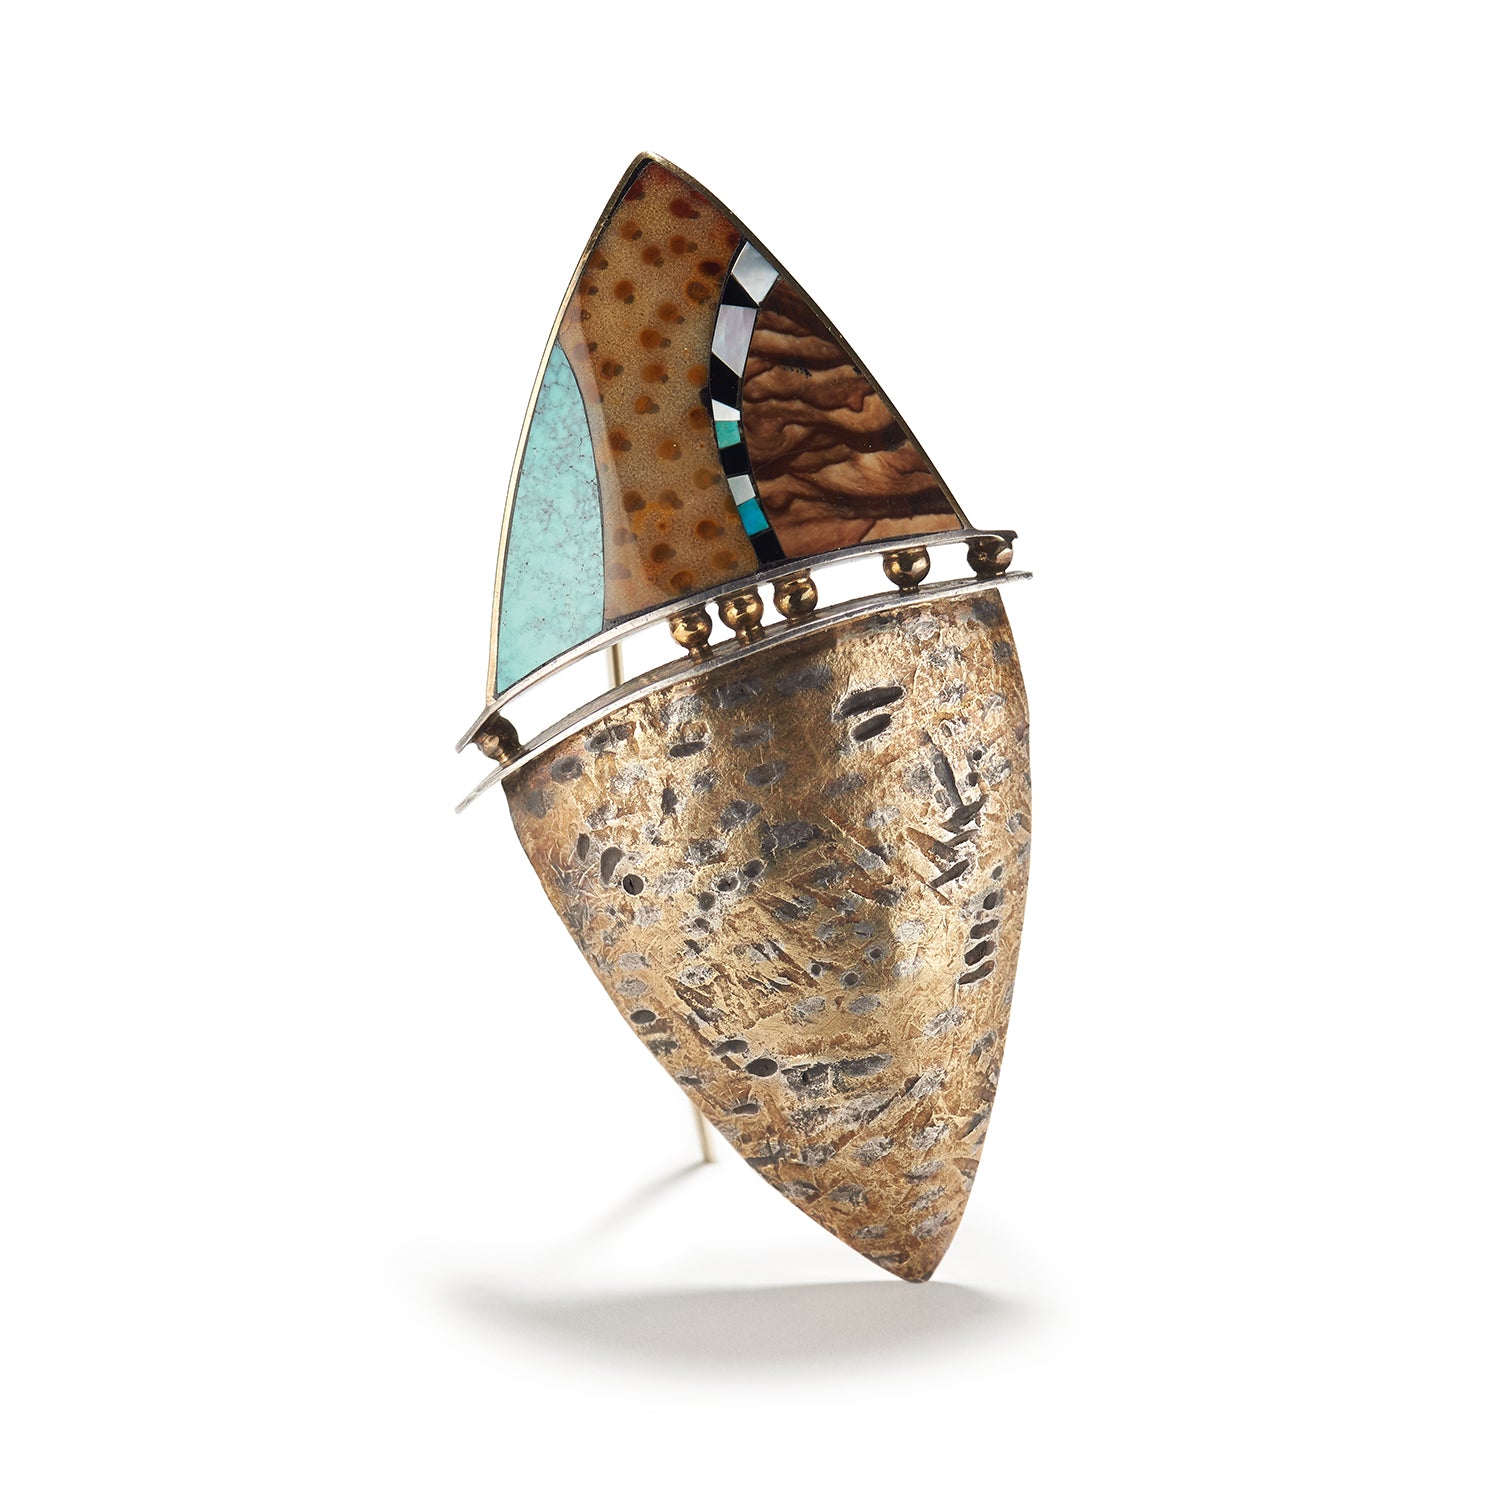 Inlaid Jasper, Palm Wood and Turquoise Brooch